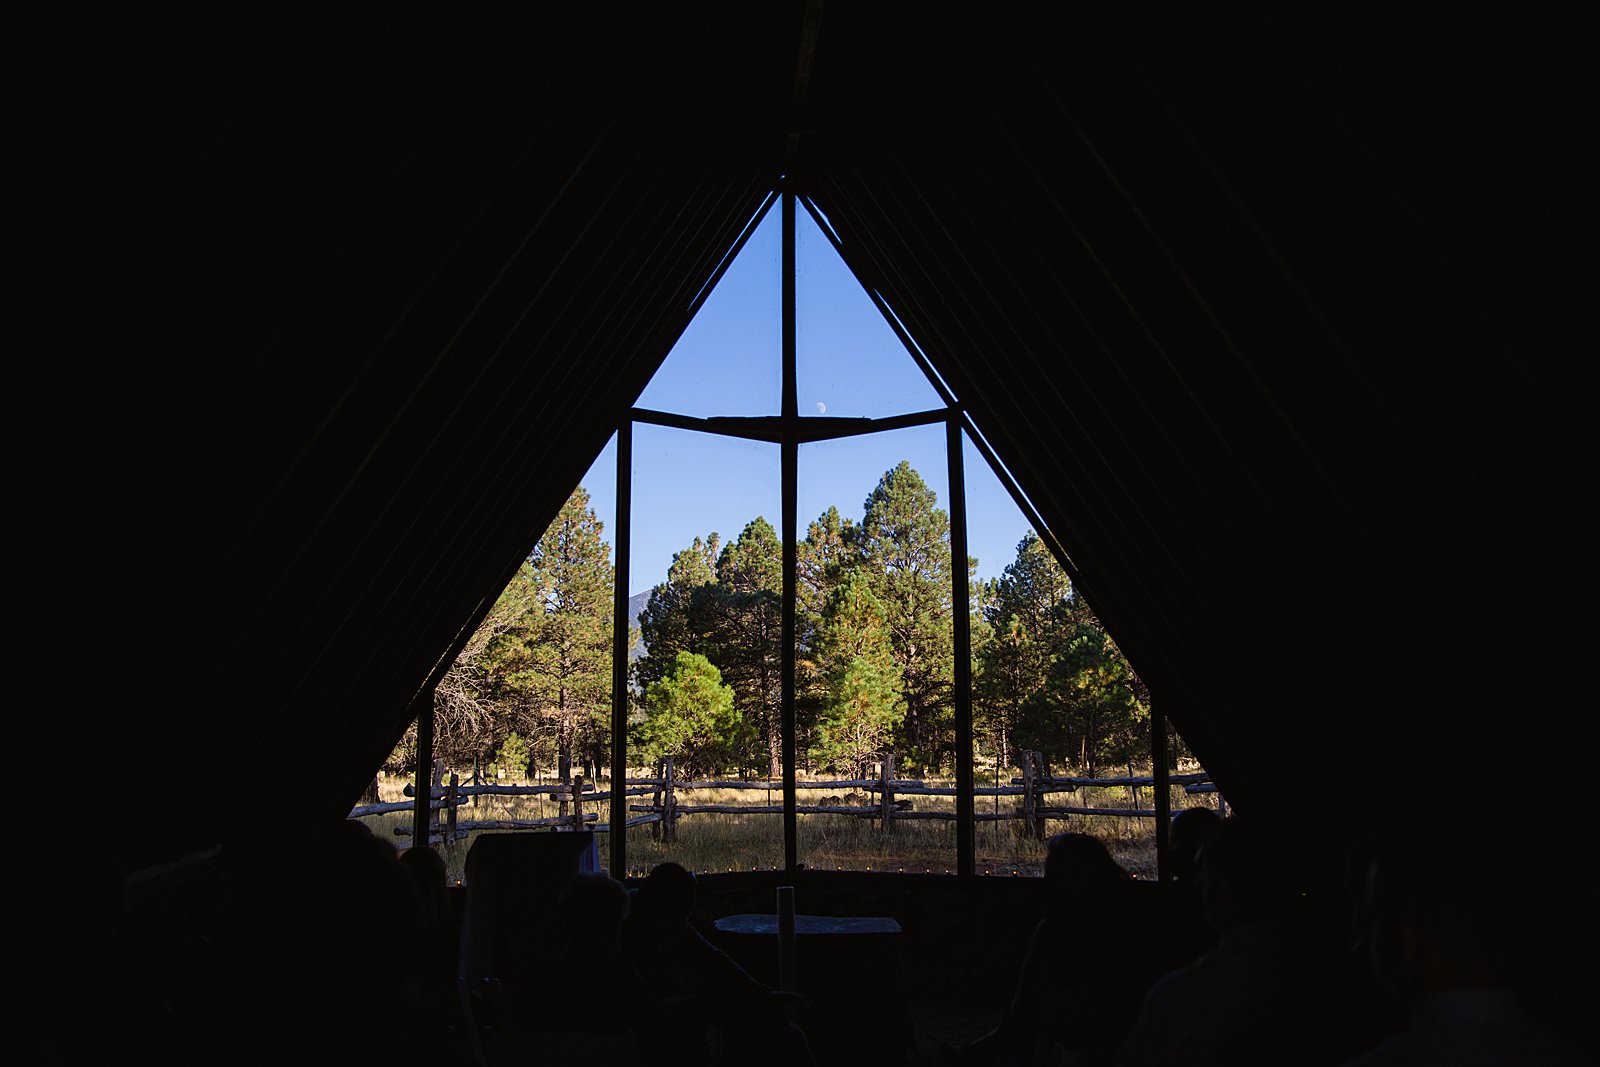 View from the inside of Chapel of the Holy Dove by Flagstaff wedding photographer PMA Photography.